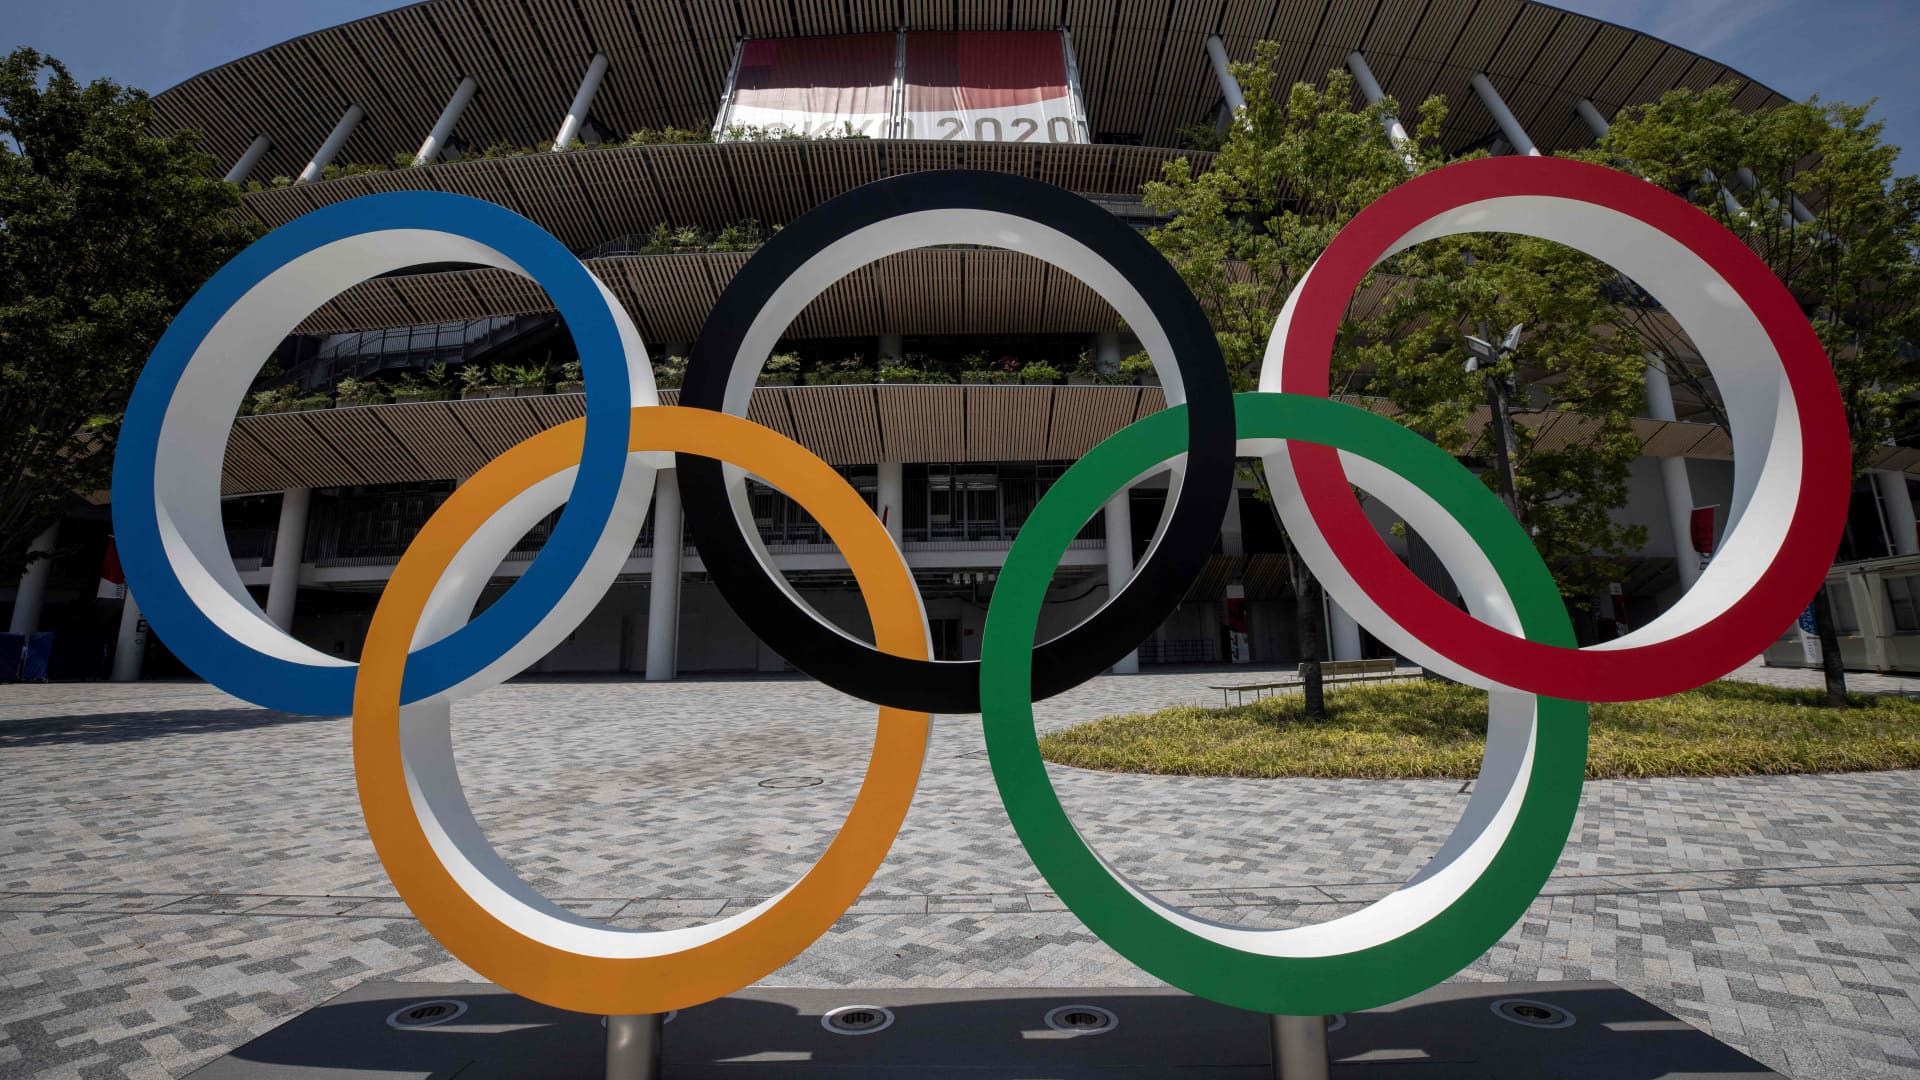 The Olympic rings standing in front of the Olympic Stadium in Tokyo on July 20, 2021 ahead of the Tokyo 2020 Olympic Games.